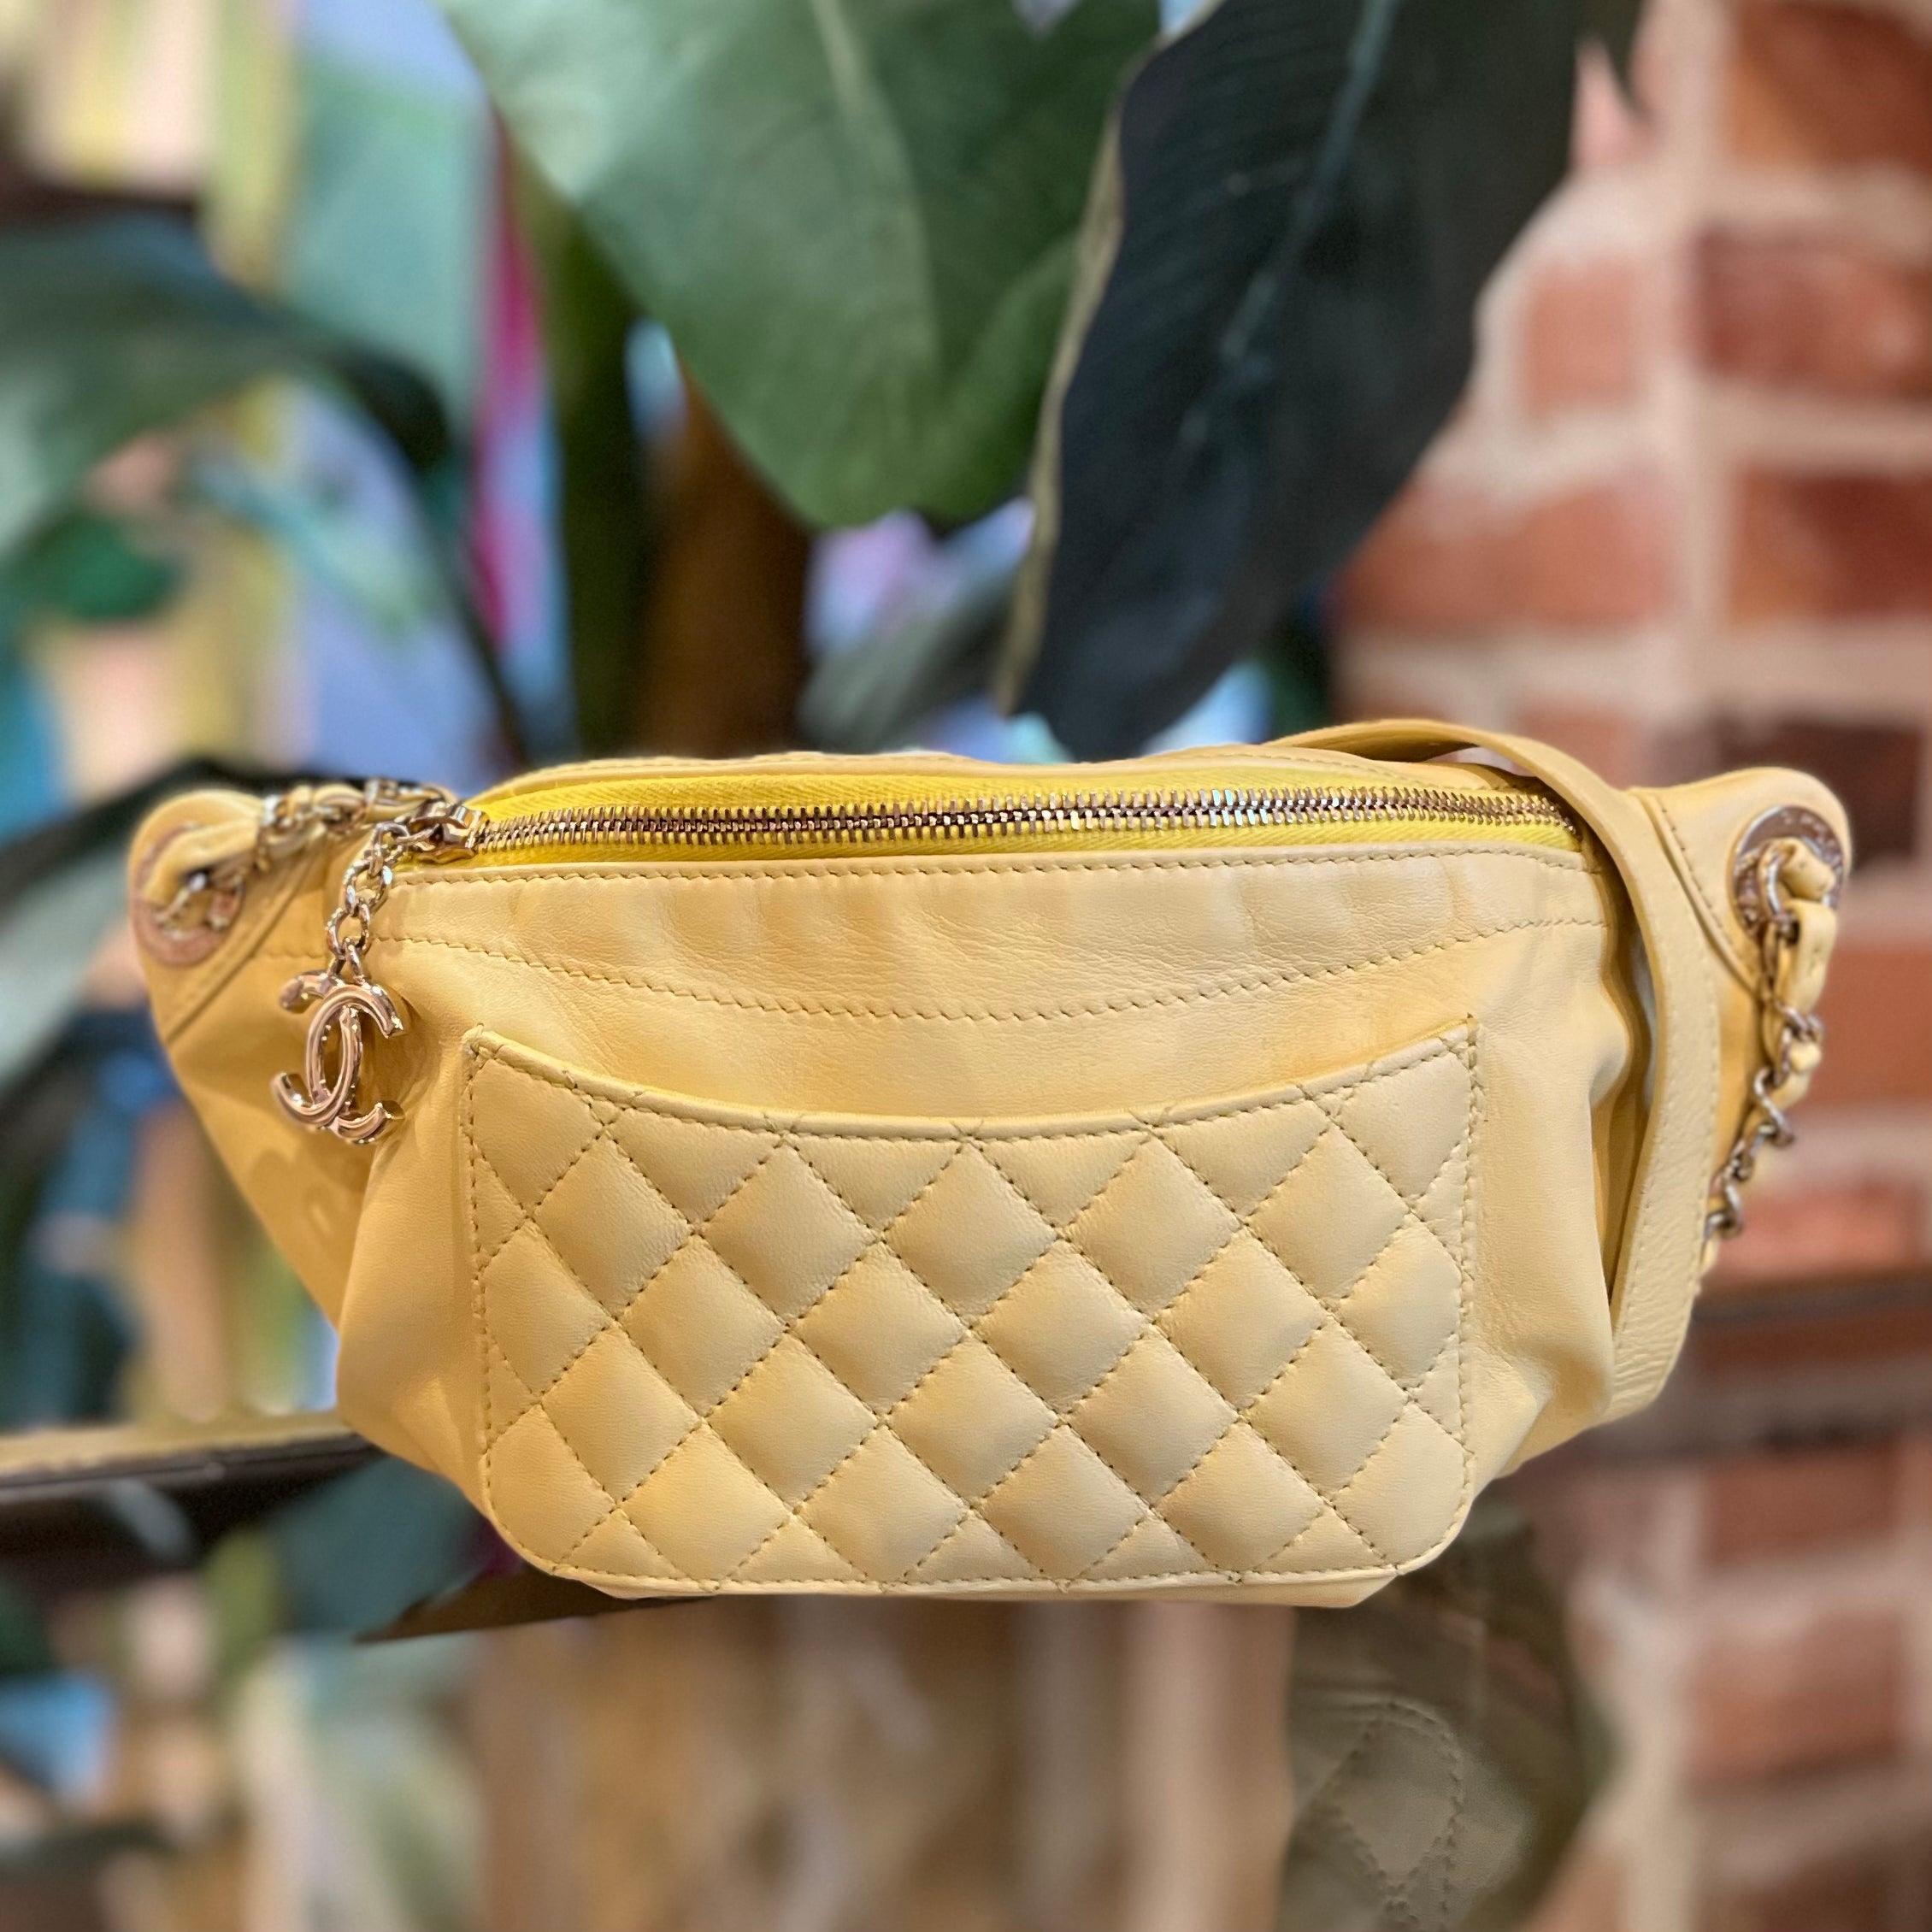 CHANEL Yellow Lambskin Quilted Front Pocket Waist Belt Bag - The